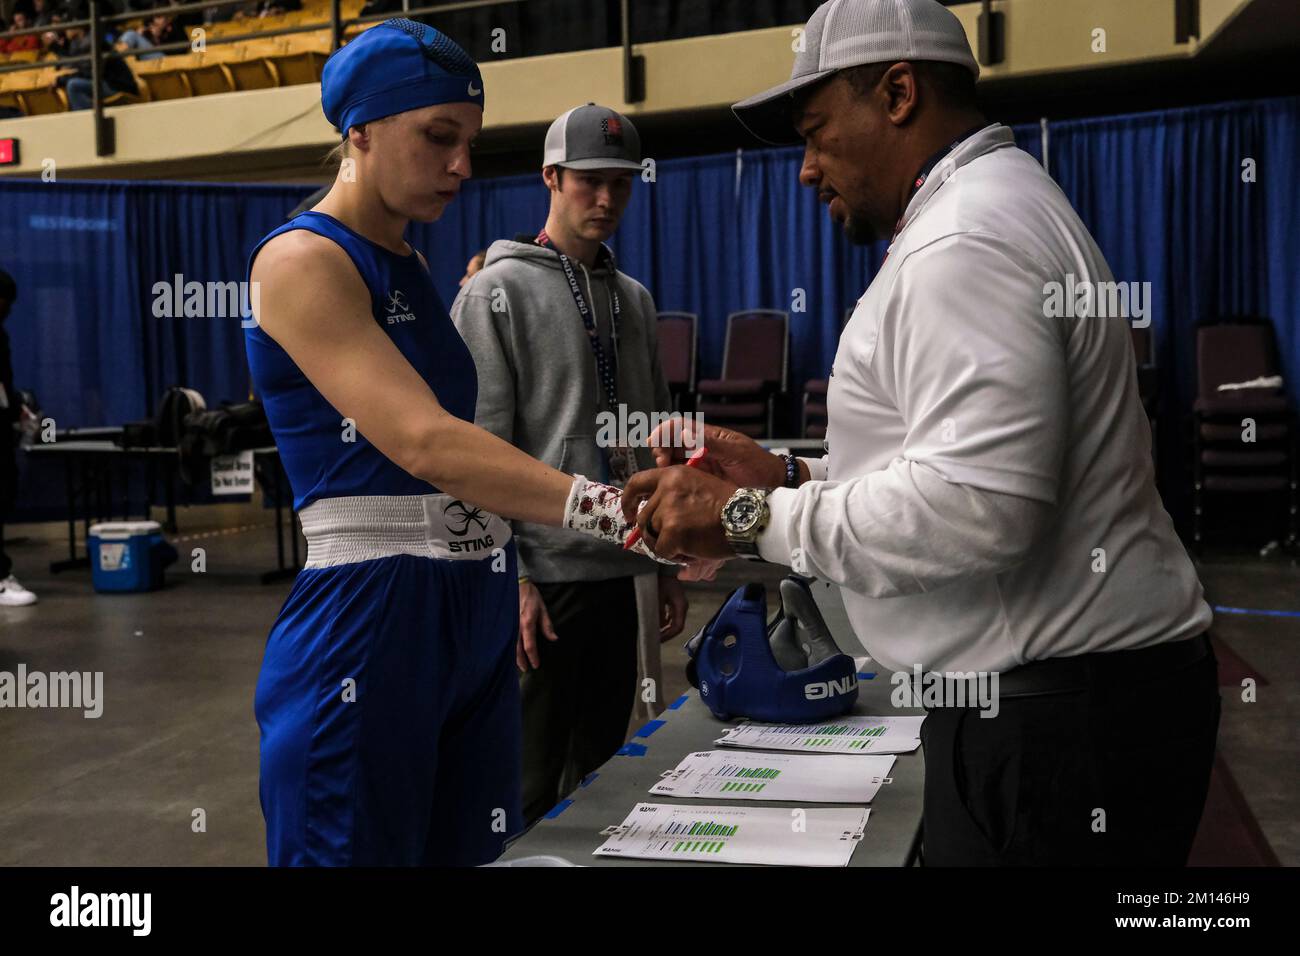 https://c8.alamy.com/comp/2M146H9/lubbock-tx-usa-9th-dec-2022-christine-forkins-of-nashville-tn-has-her-hand-wraps-inspected-by-a-usa-boxing-official-prior-to-getting-her-gloves-before-her-semifinal-bout-credit-image-adam-delgiudicezuma-press-wire-credit-zuma-press-incalamy-live-news-2M146H9.jpg